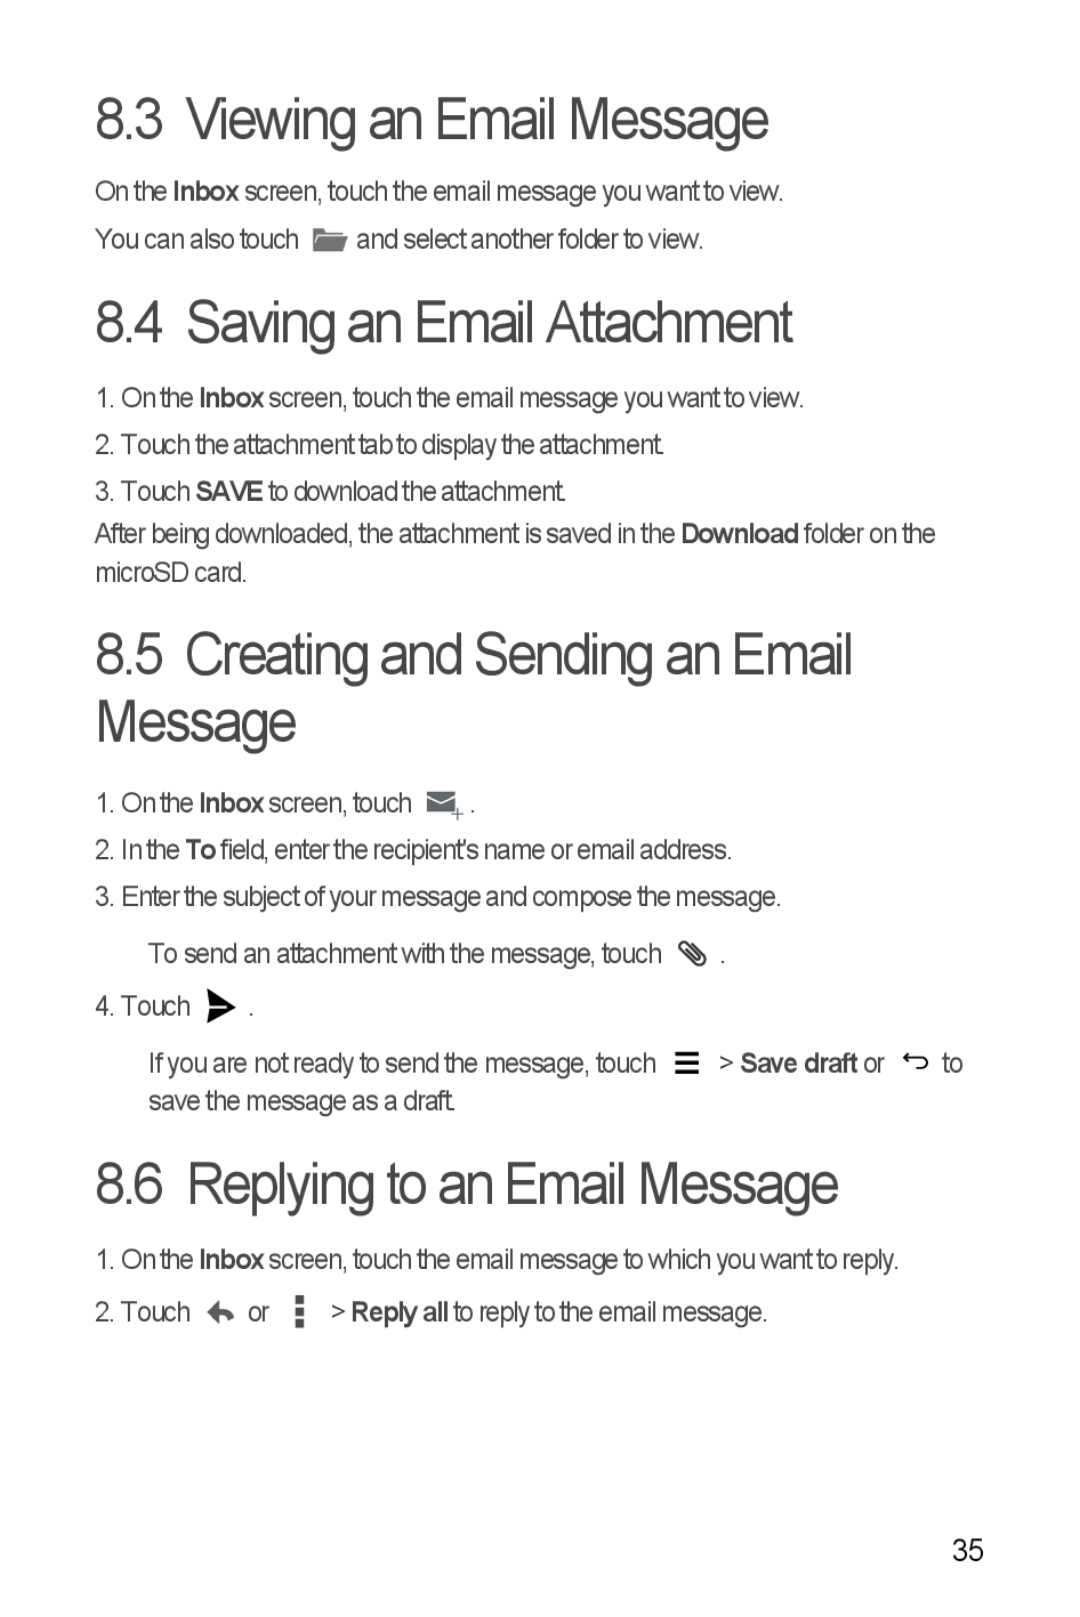 Huawei H881C manual Viewing an Email Message, Saving an Email Attachment, Creating and Sending an Email Message 